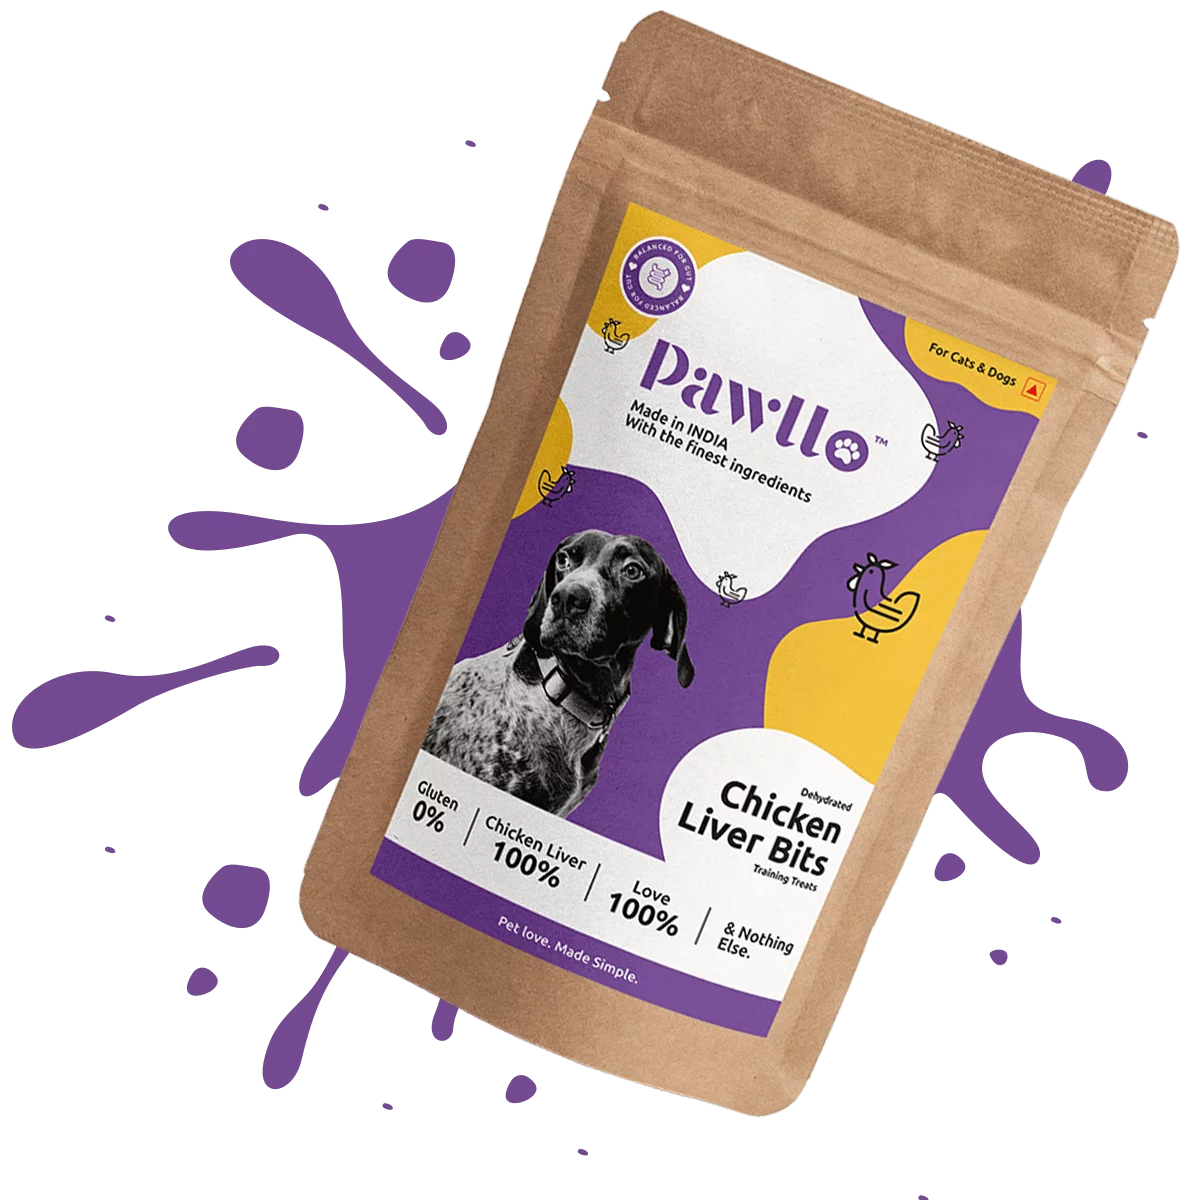 Chicken Liver Bits - Dehydrated Natural Taurine and Protein Loaded Snack for Cats and Dogs